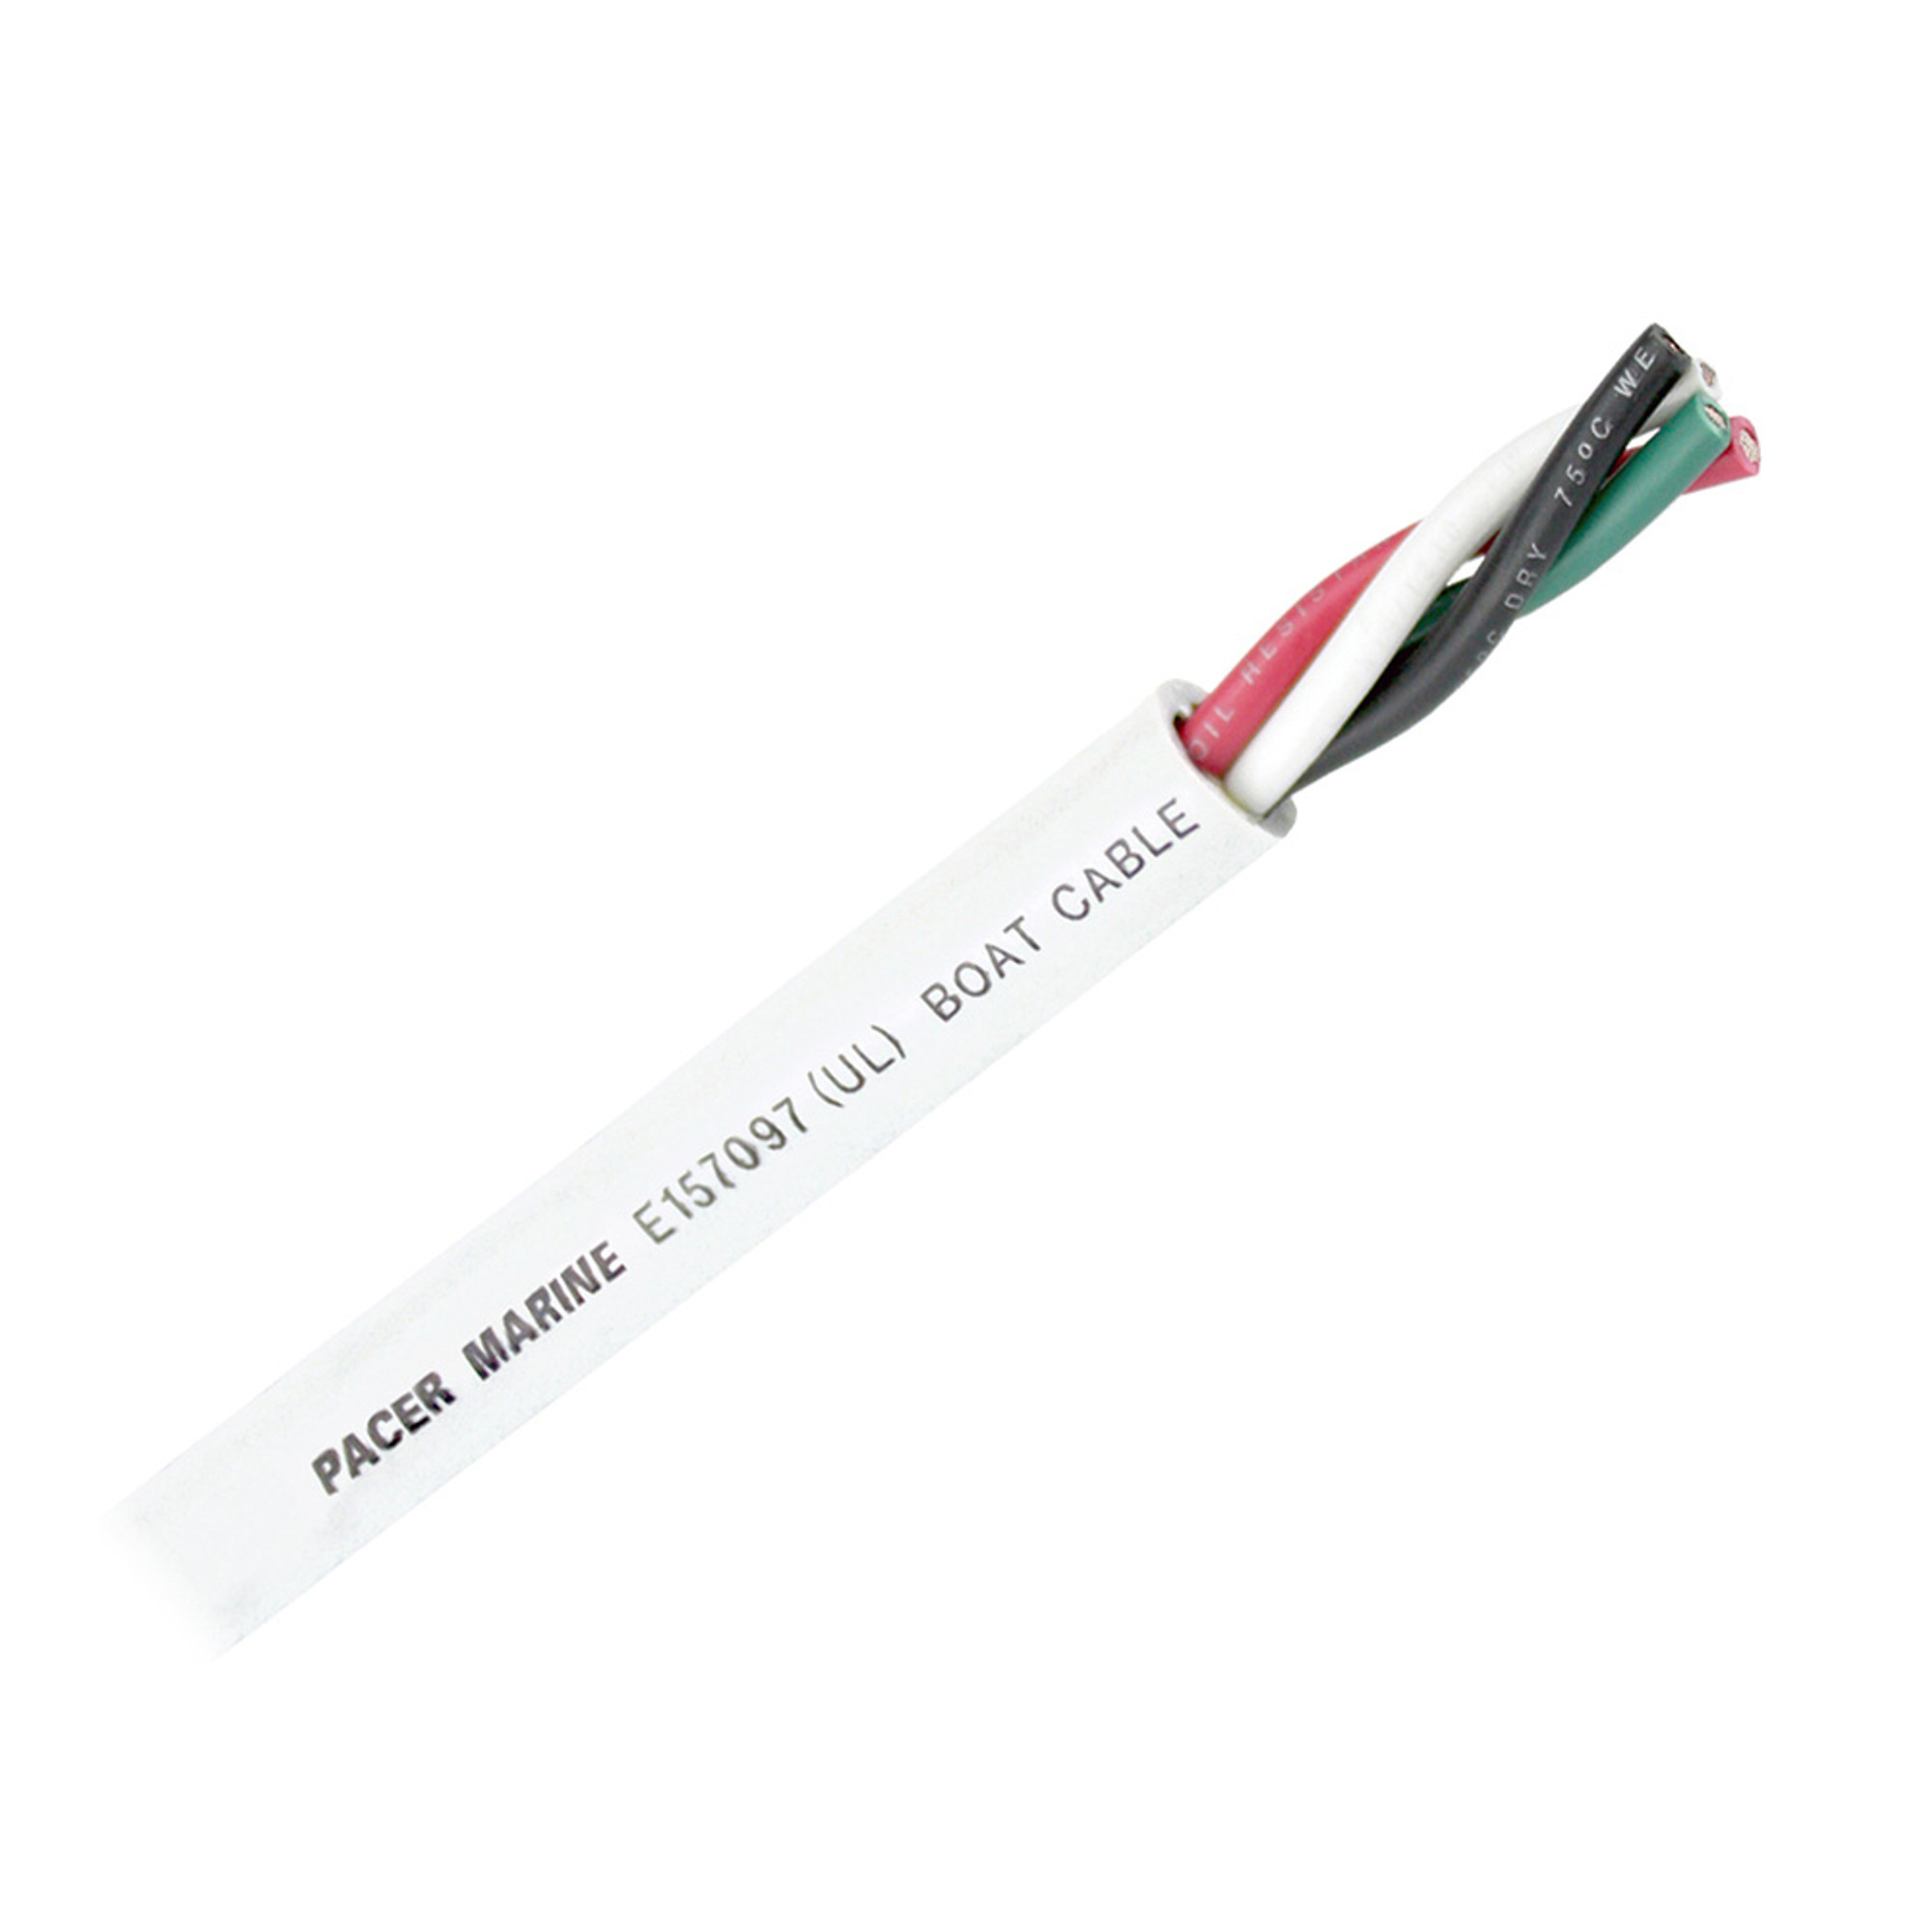 Pacer Round 4 Conductor Cable - 100' - 12/4 AWG - Black, Green, Red & White